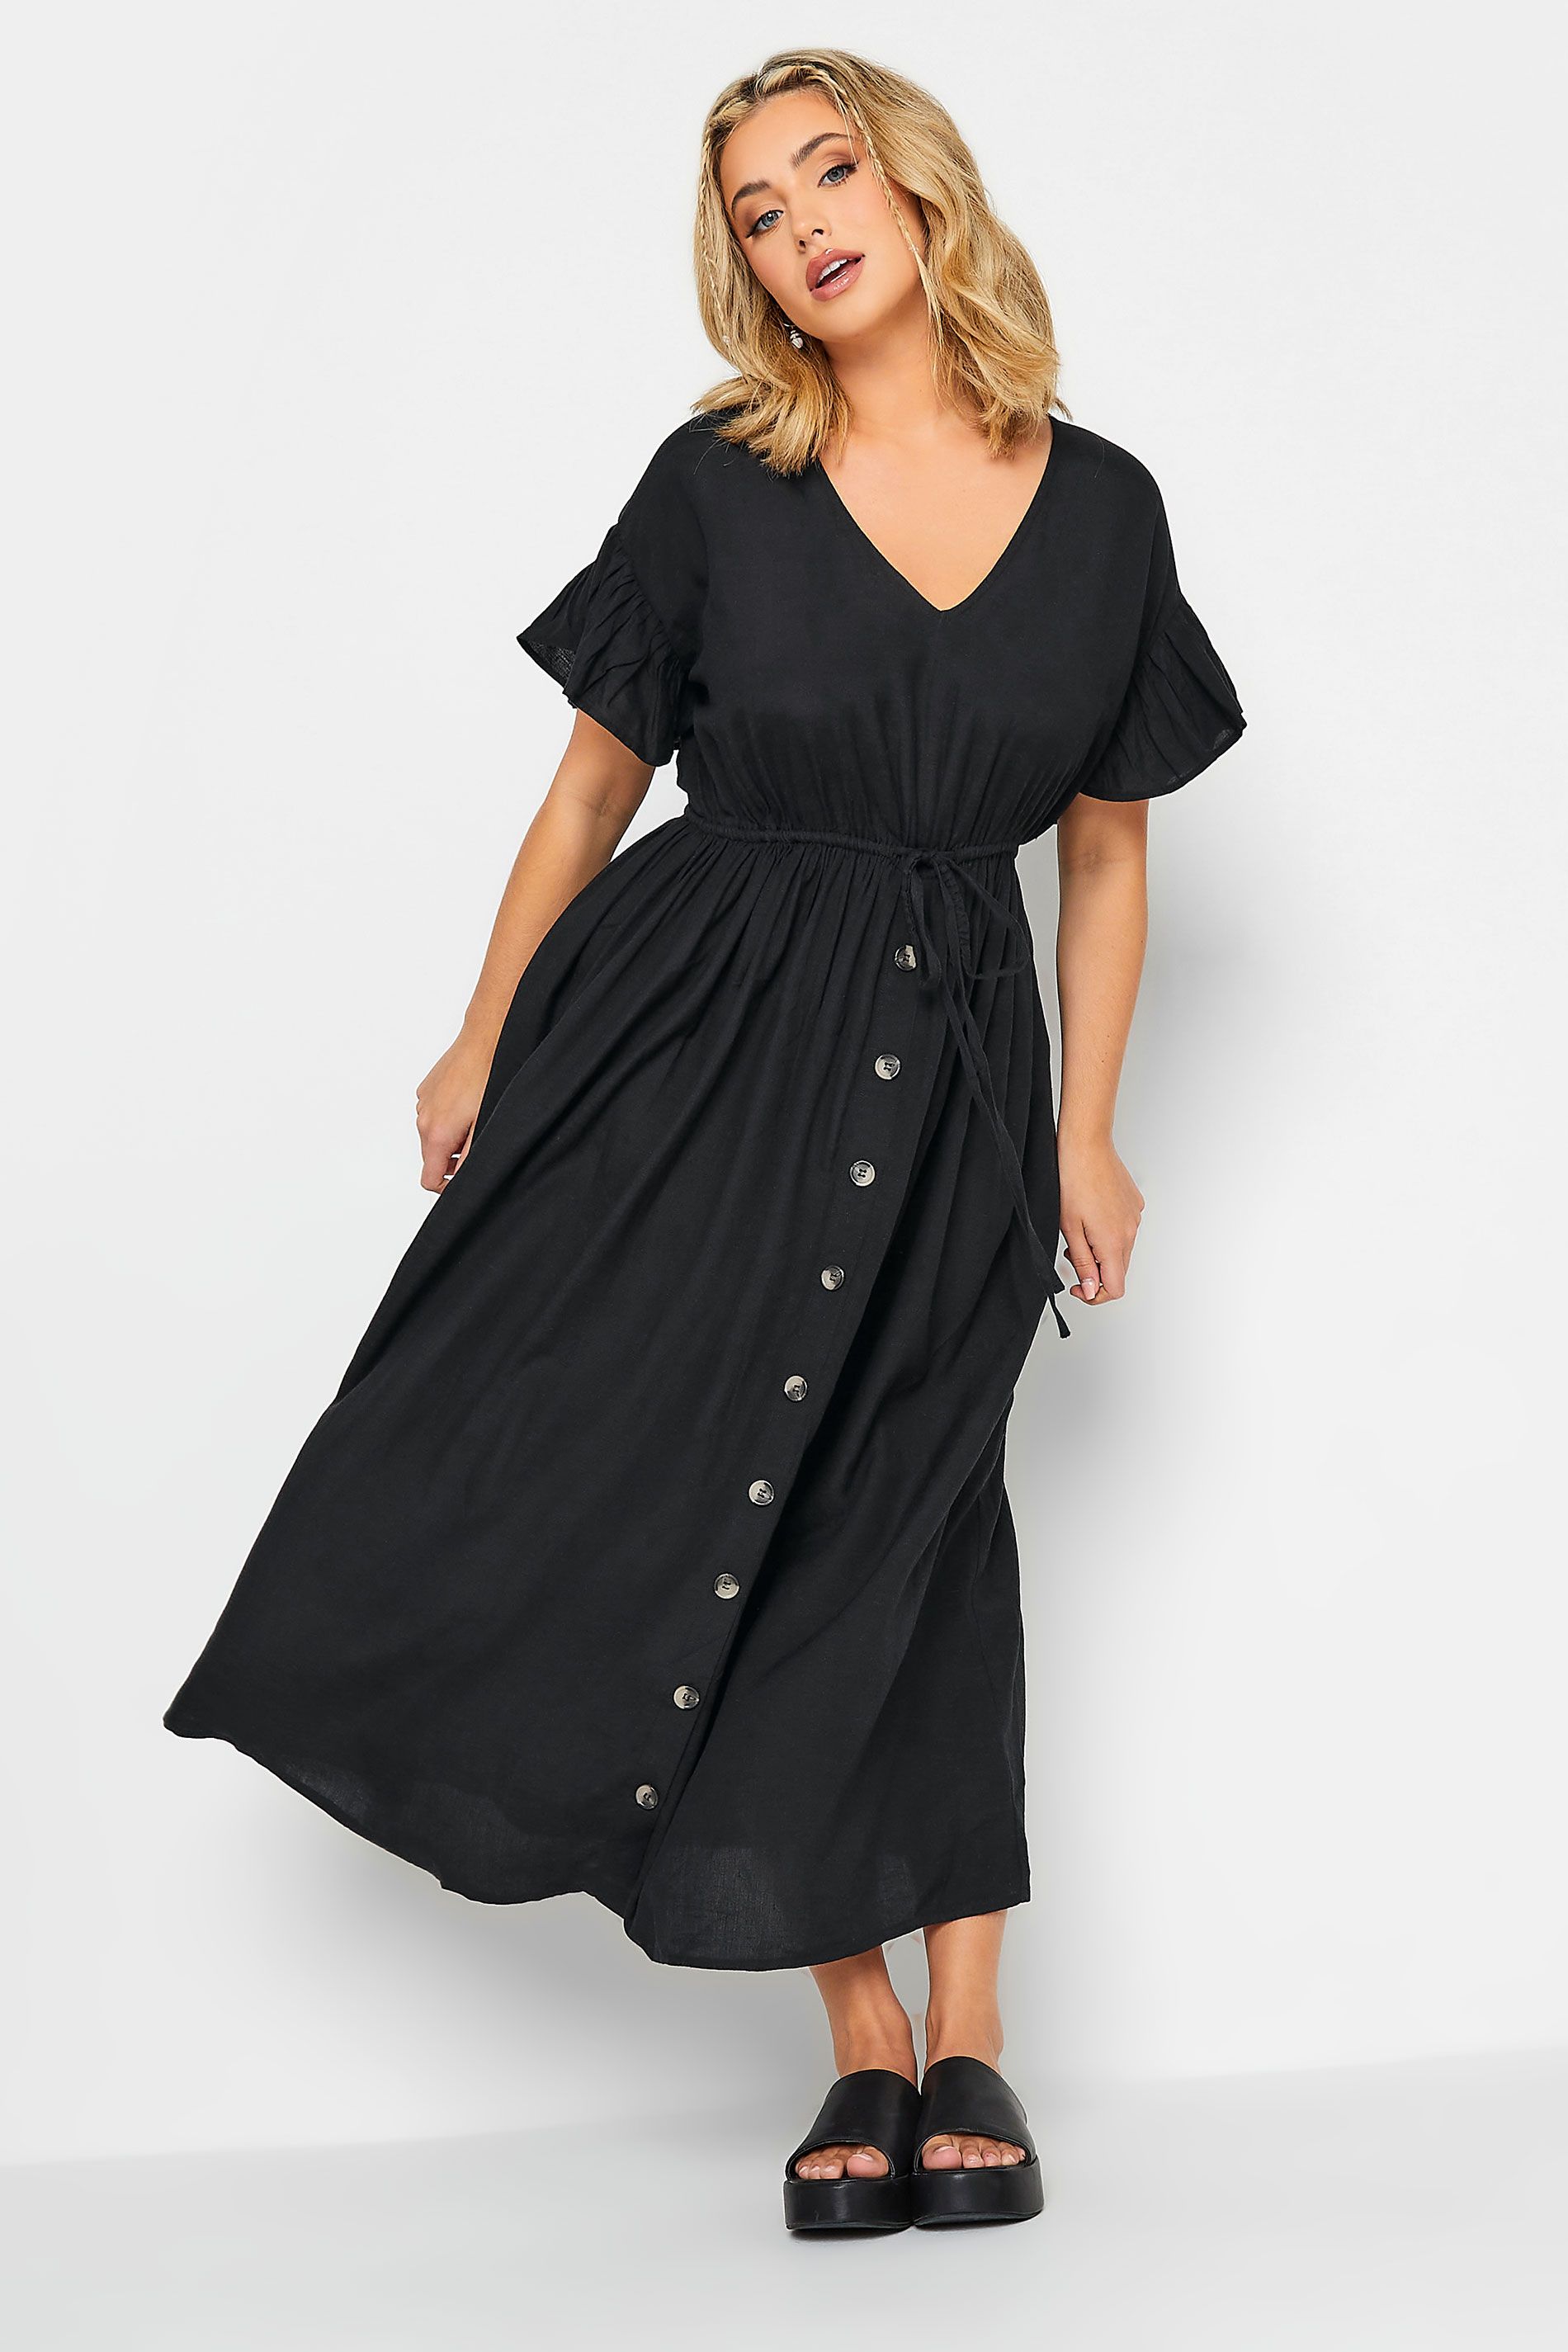 LIMITED COLLECTION Plus Size Black Frill Sleeve Cotton Maxi Dress | Yours Clothing 1